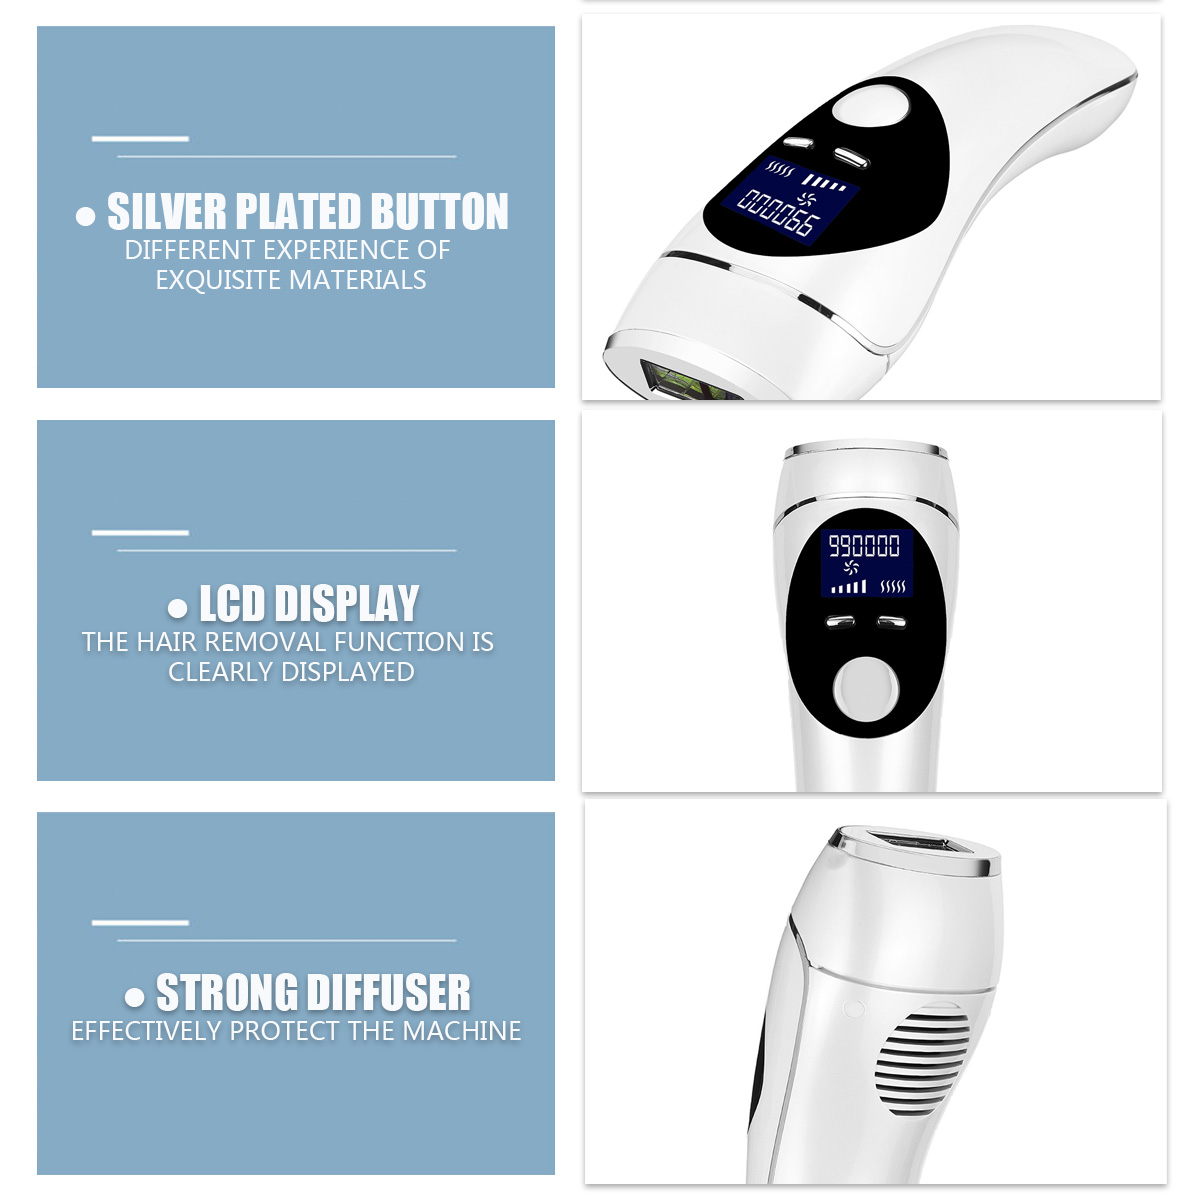 999999-Flashes-DIY-IPL-Laser-Hair-Removal-Device-5-Levels-Painless-Epilator-Hair-Remover-1837621-9